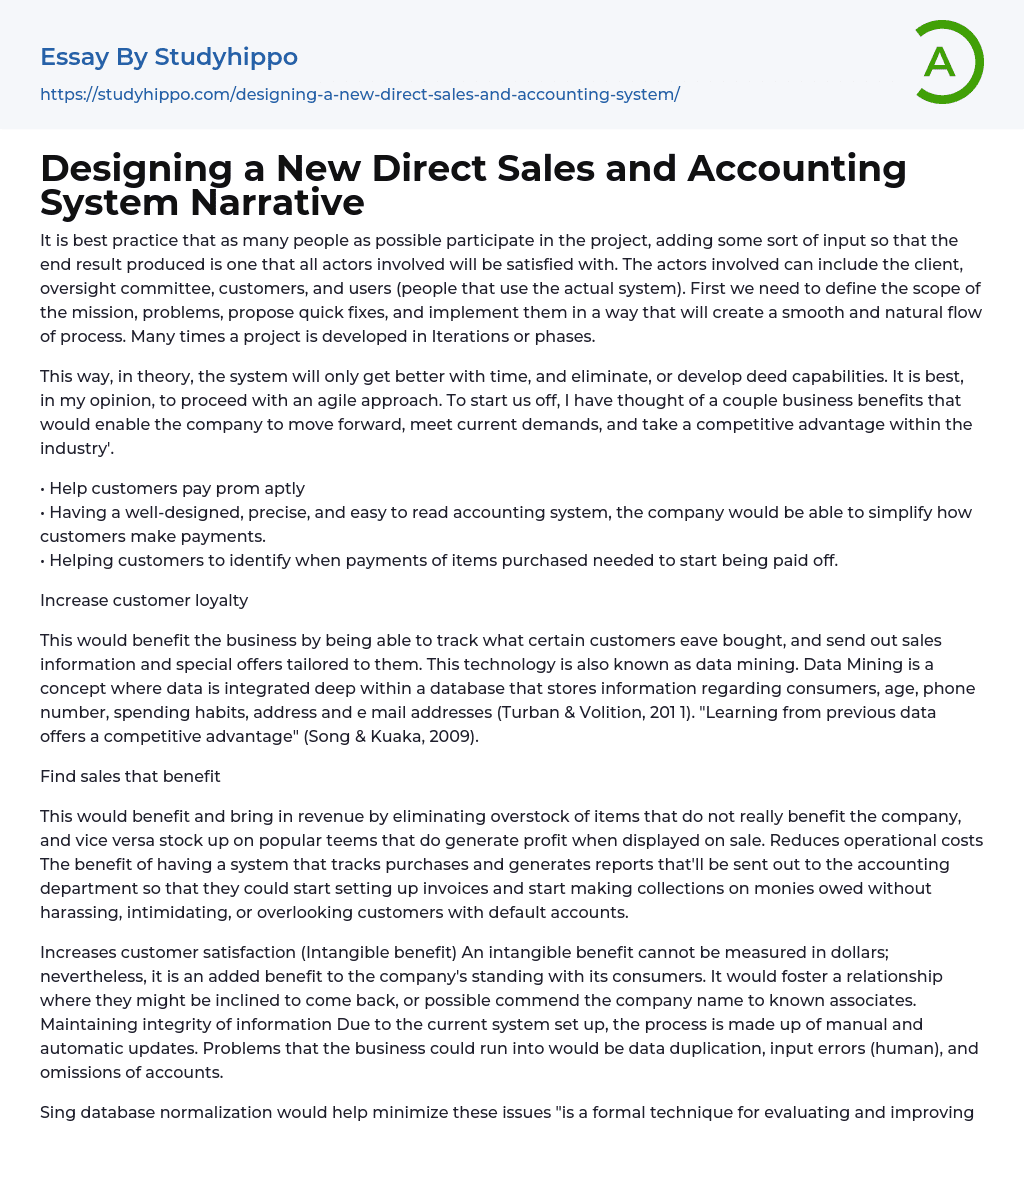 Designing a New Direct Sales and Accounting System Narrative Essay Example